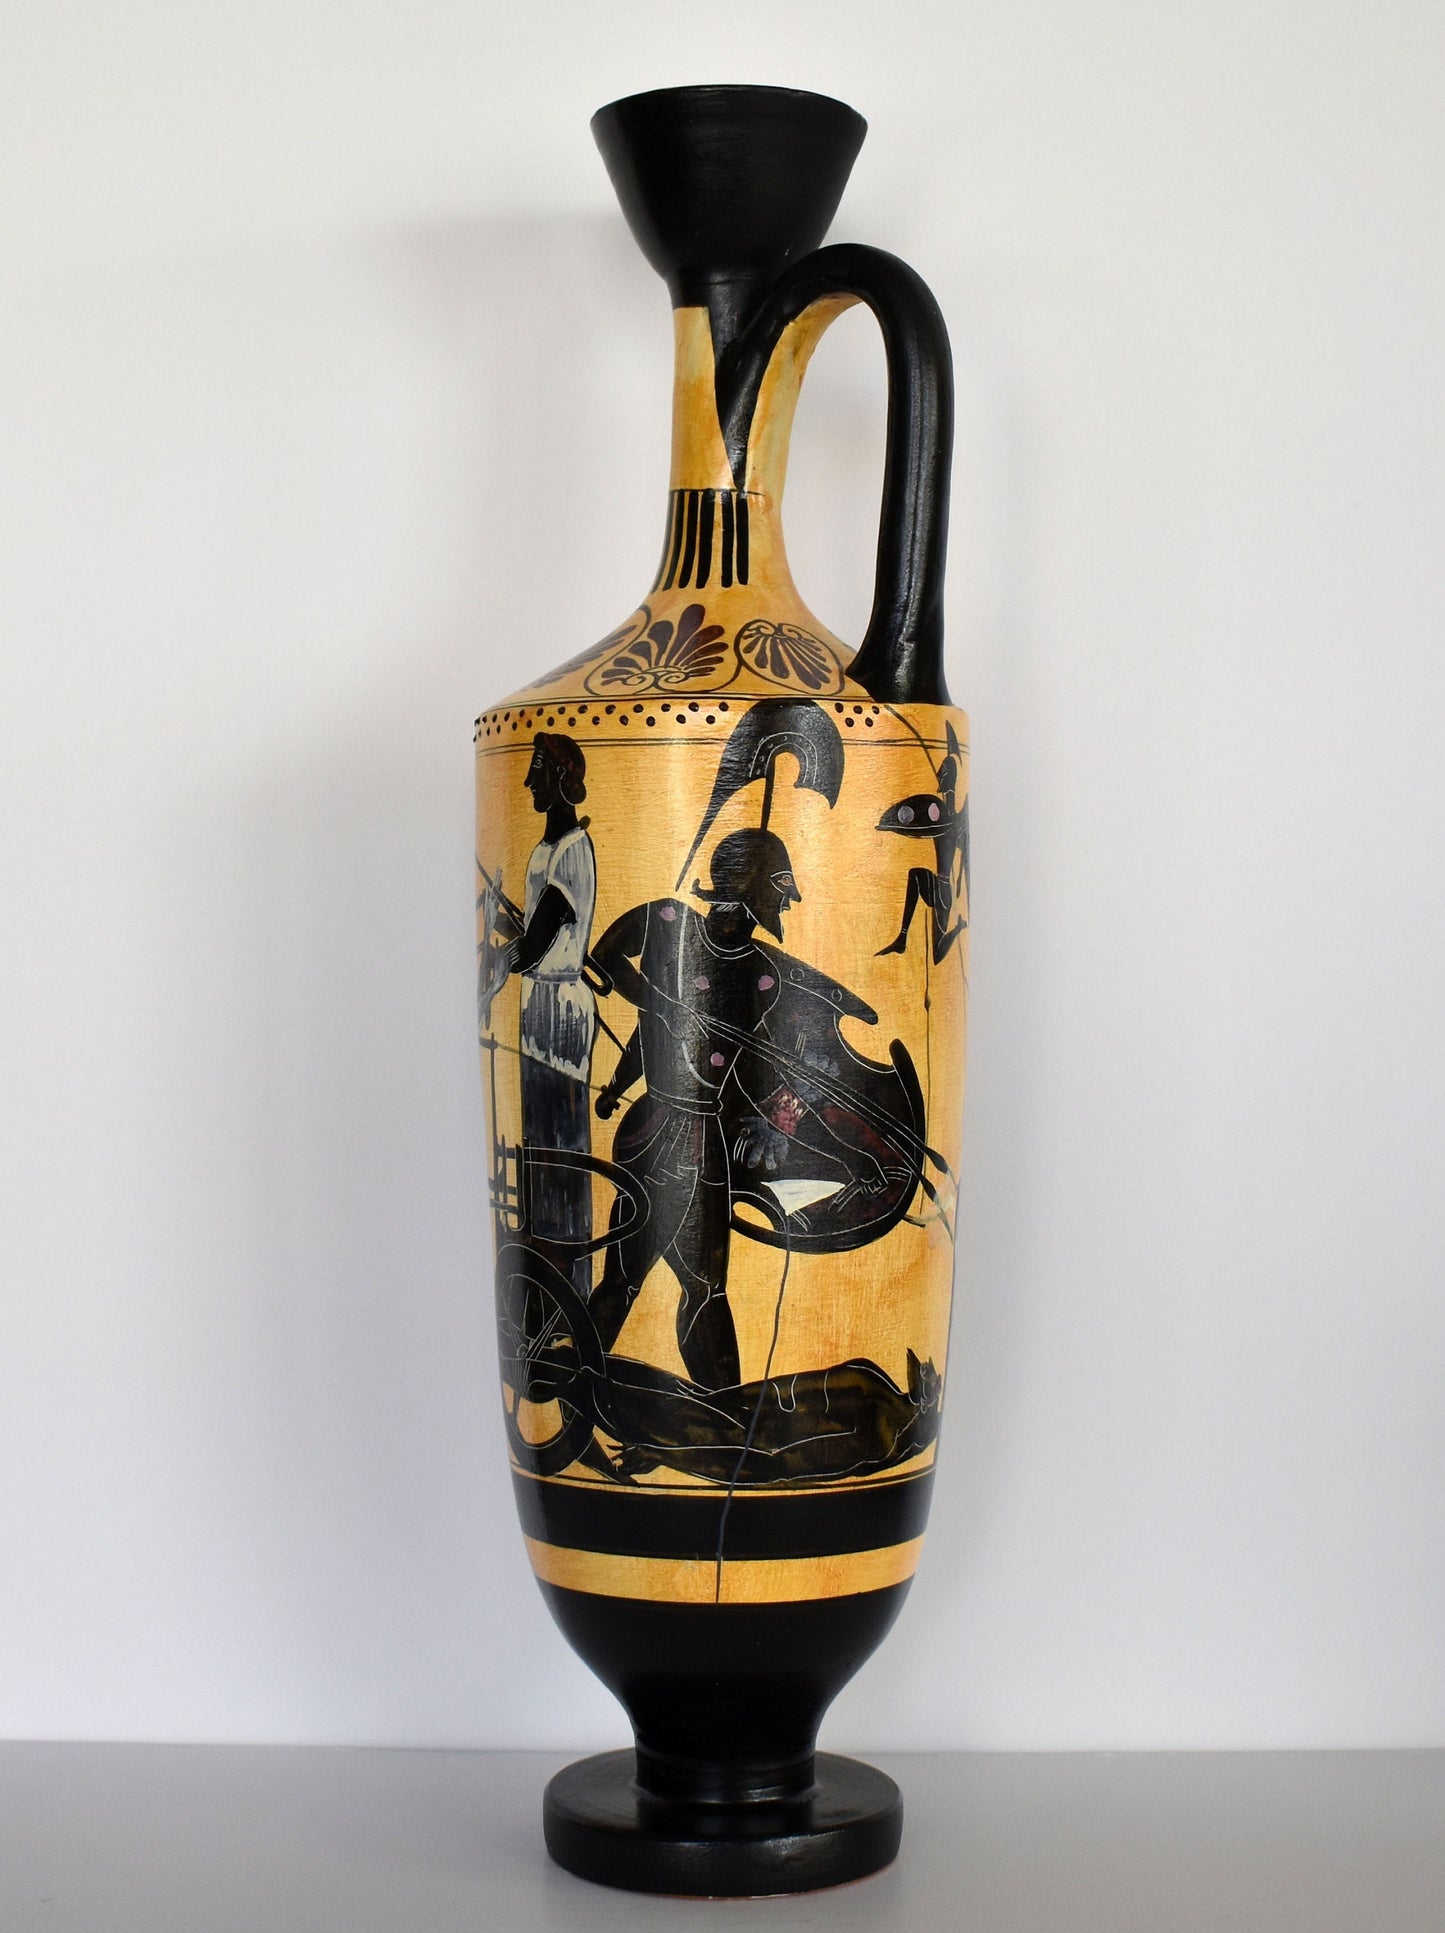 Achilles drags the Corpse of Hector with his chariot - Lekythos - 510 BC - Delos Museum - Ceramic Vase